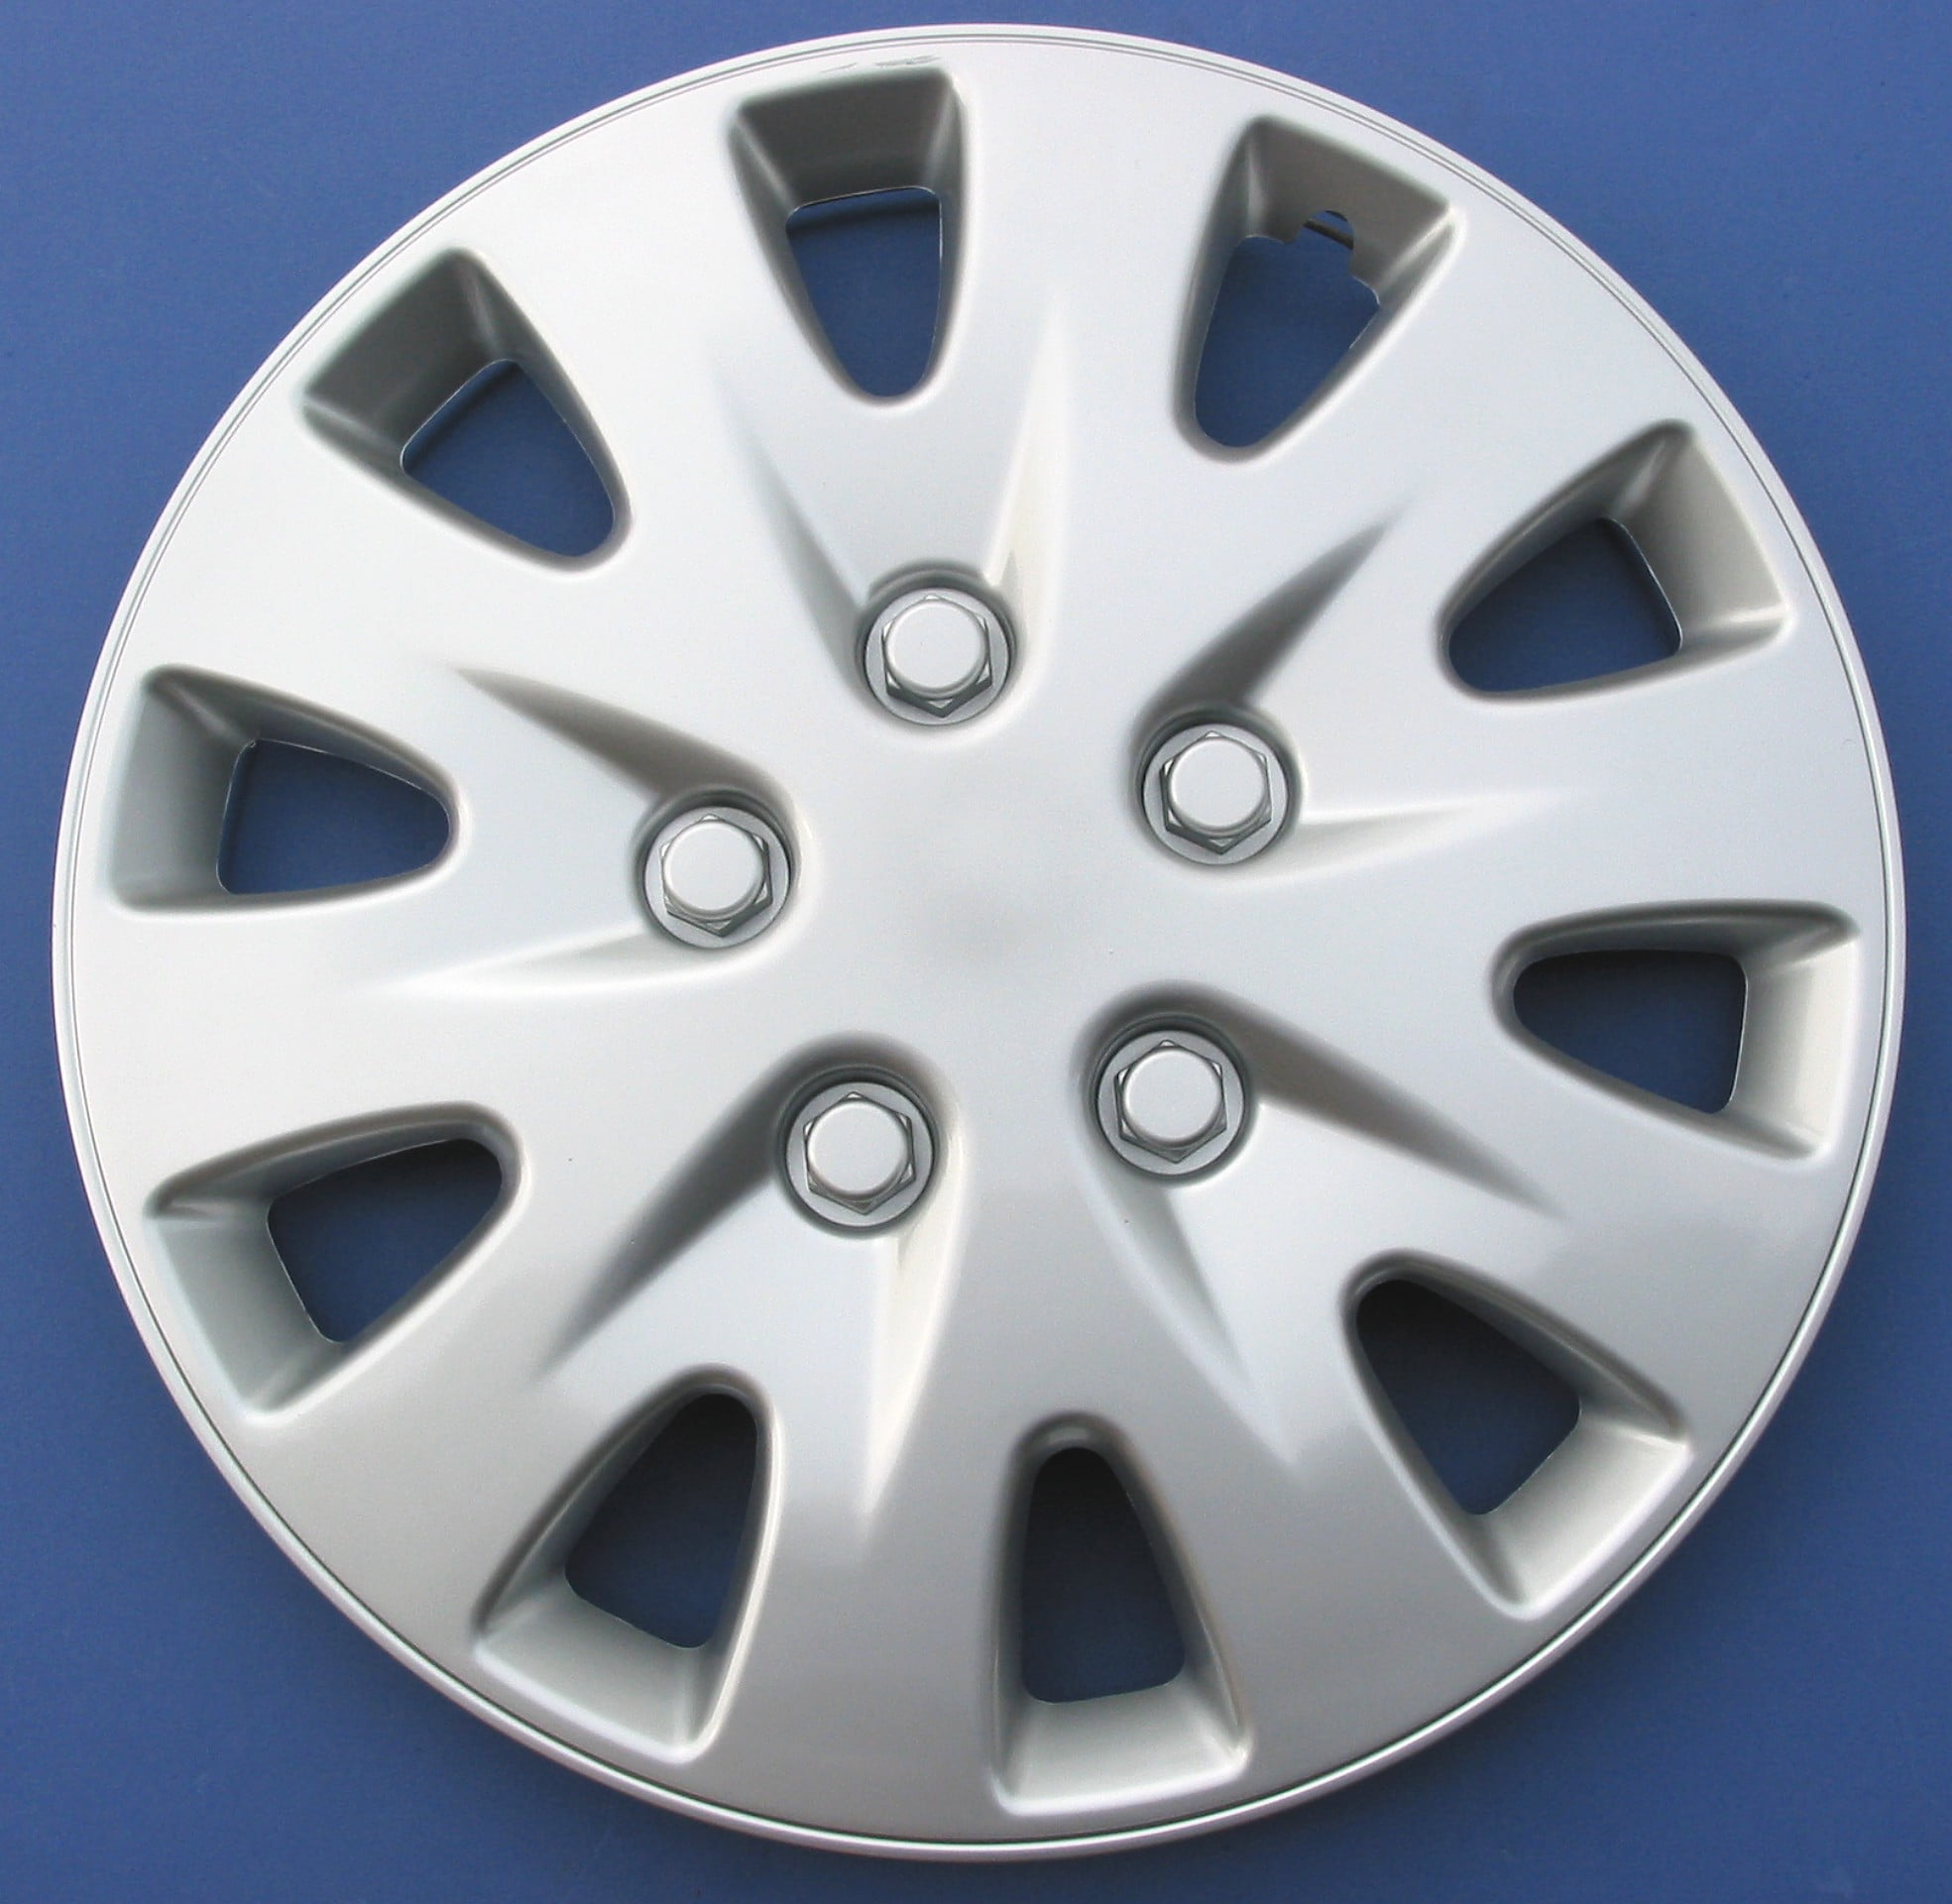 16-in Wheel Cover, Silver Alloy Finish, Auto Drive Brand, ABS